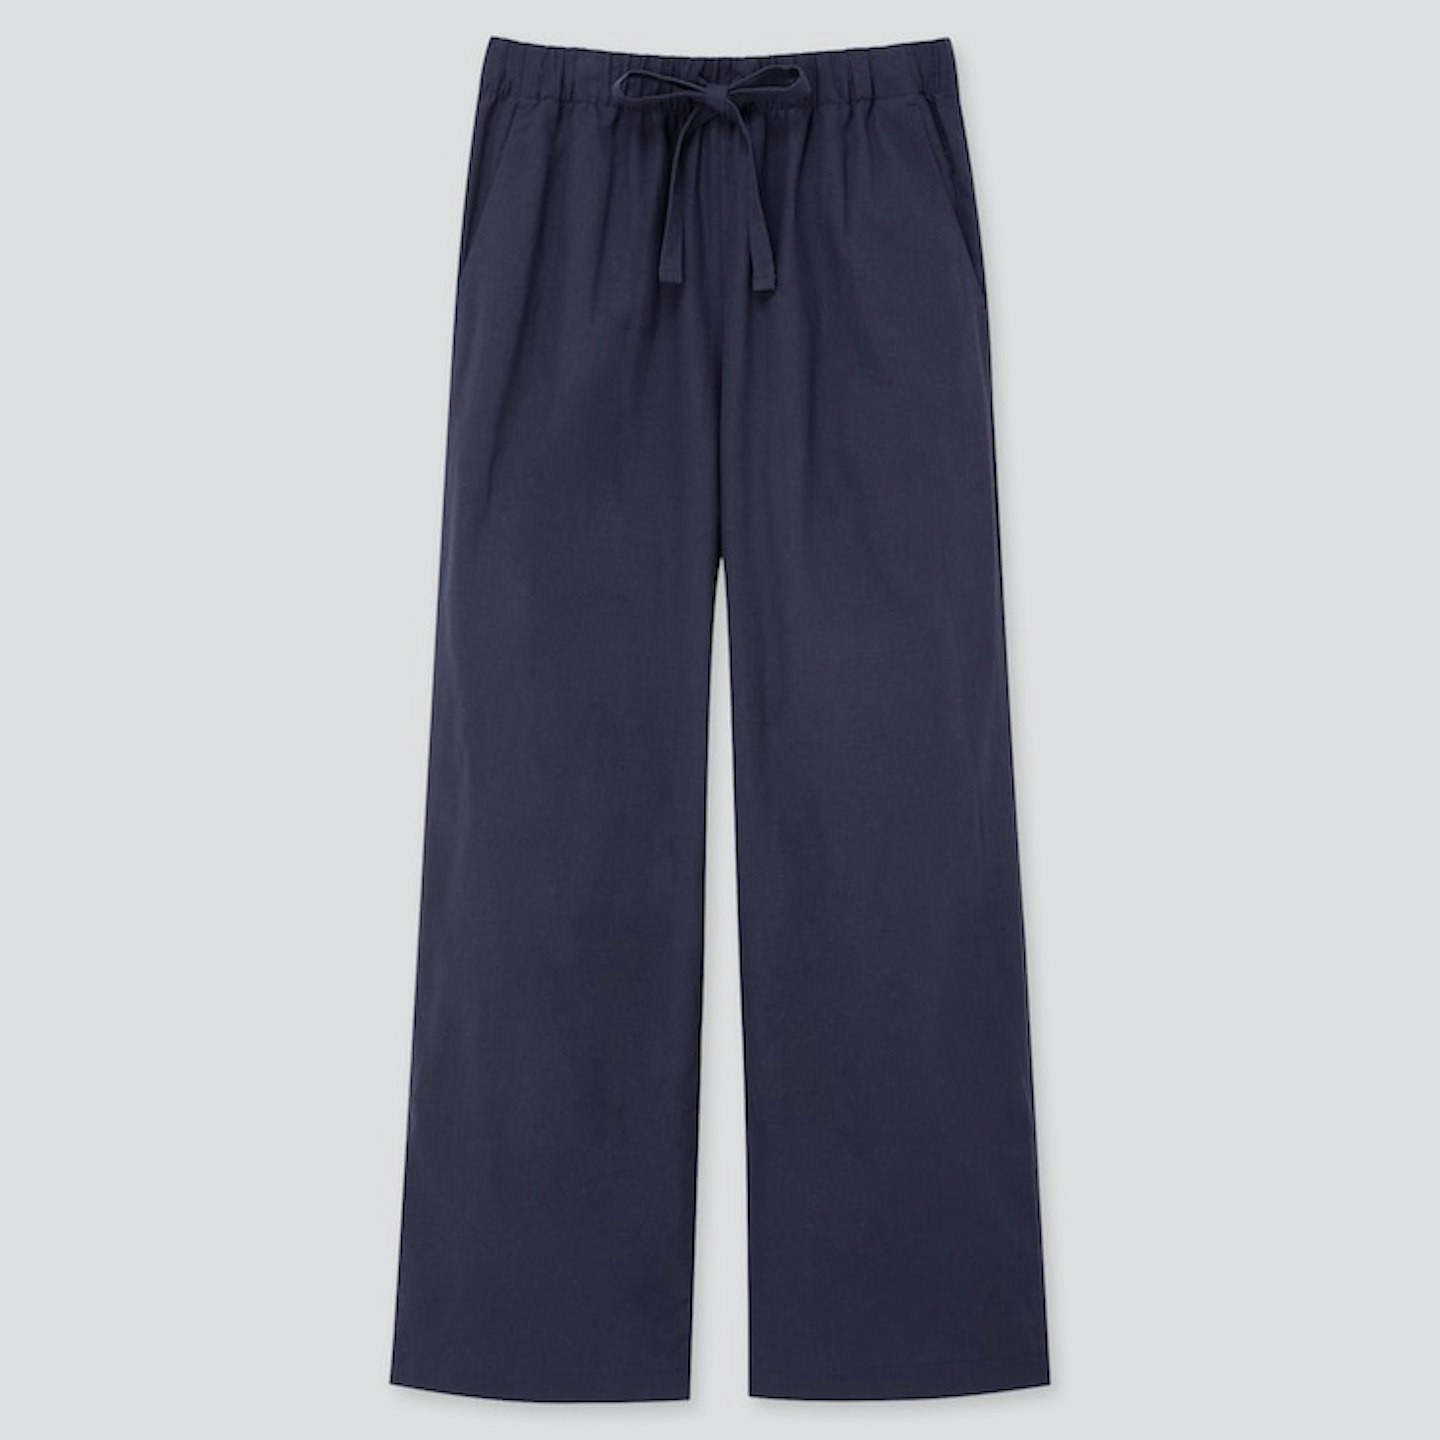 Uniqlo, Linen Relaxed Trousers, £12.90